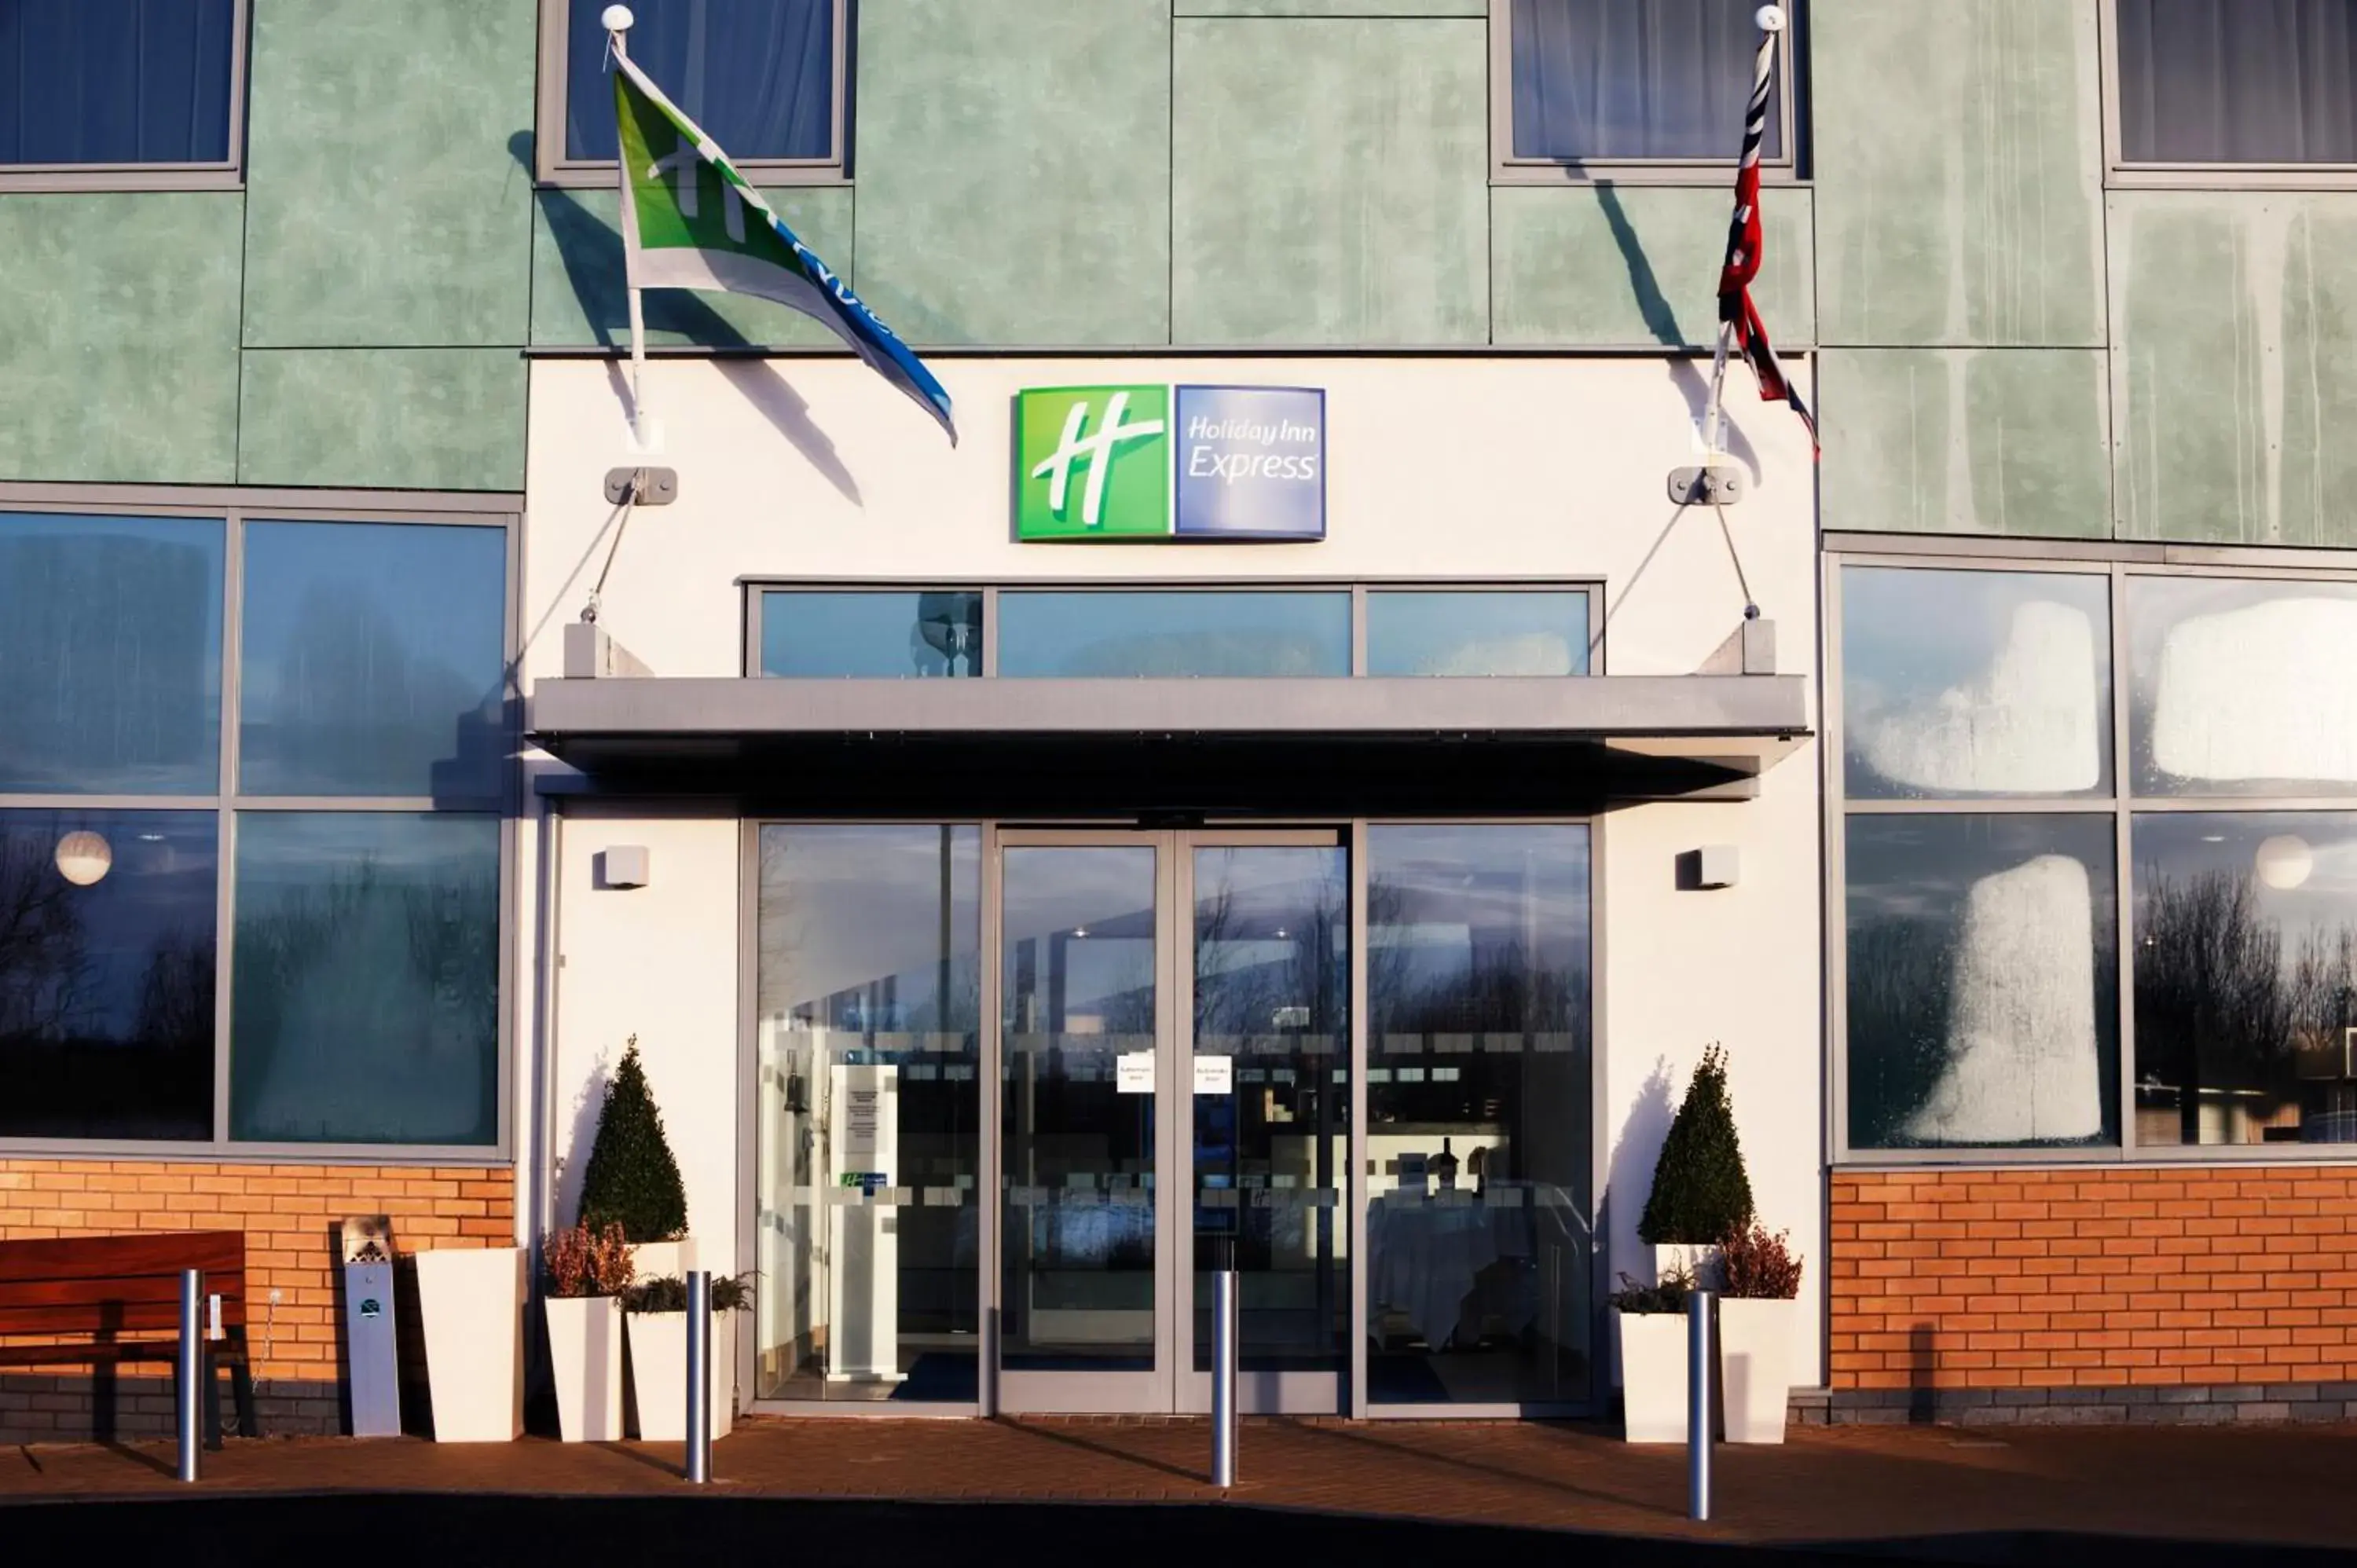 Property building in Holiday Inn Express Tamworth